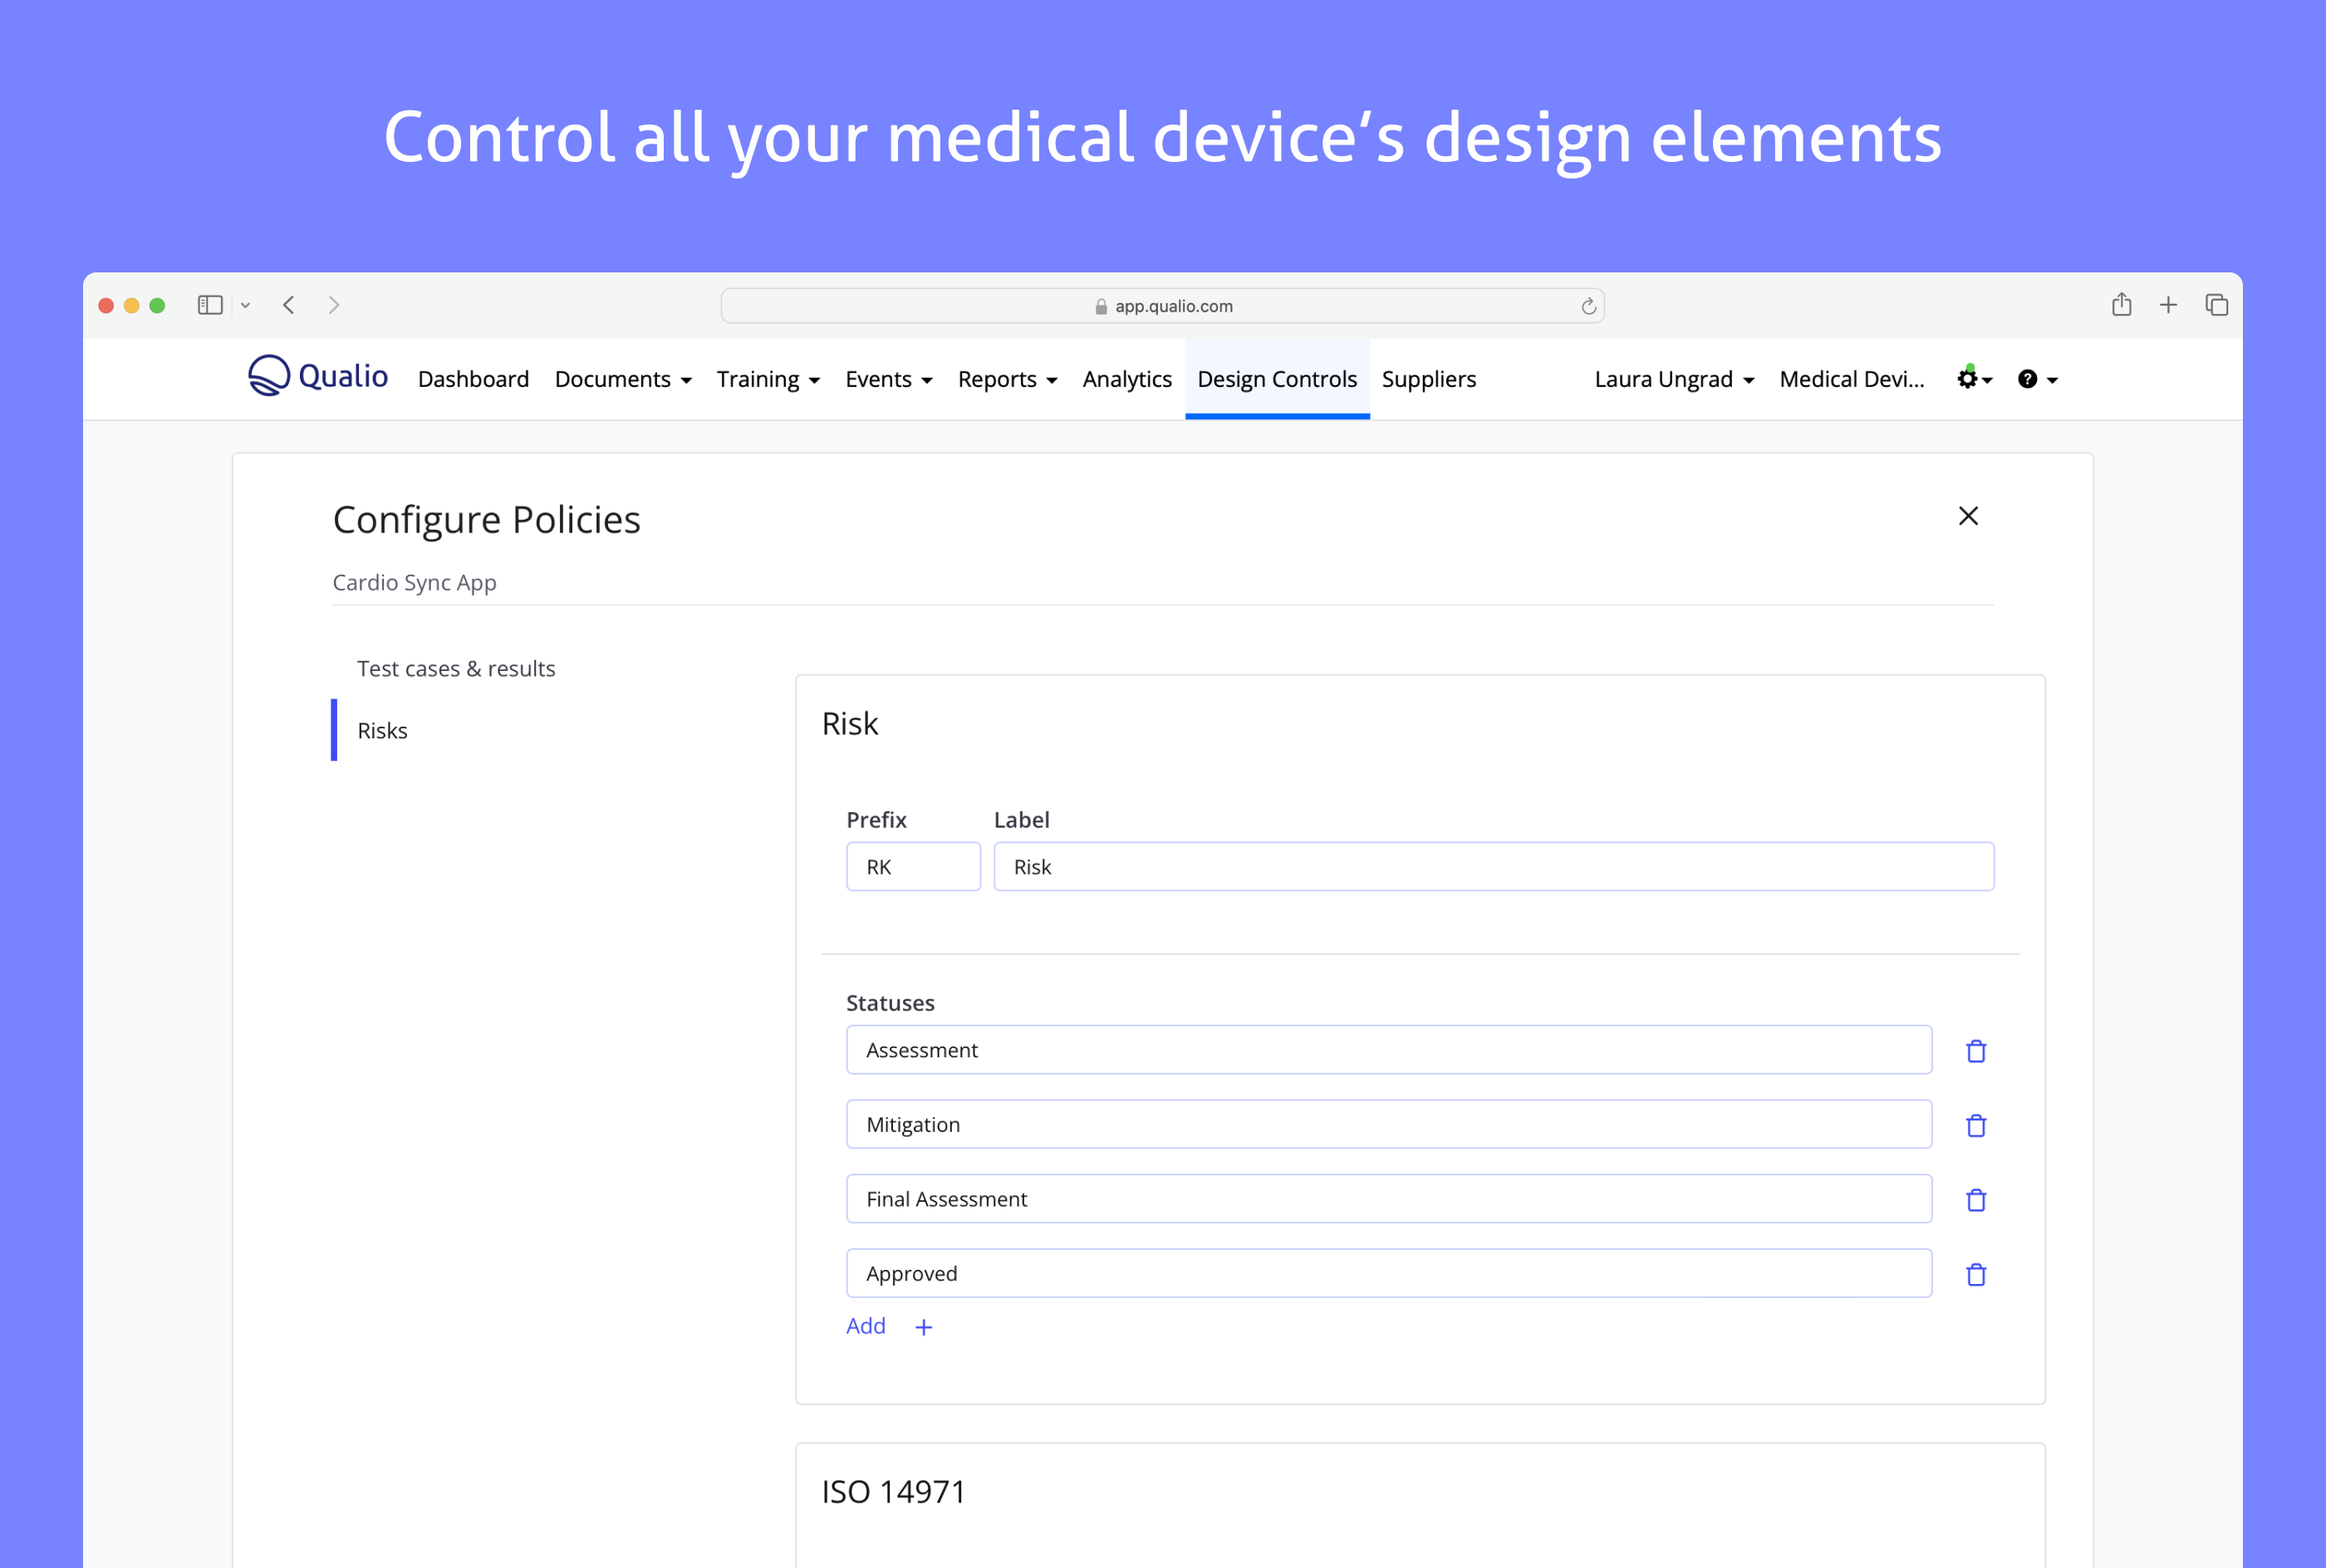 Control all your medical device's design elements